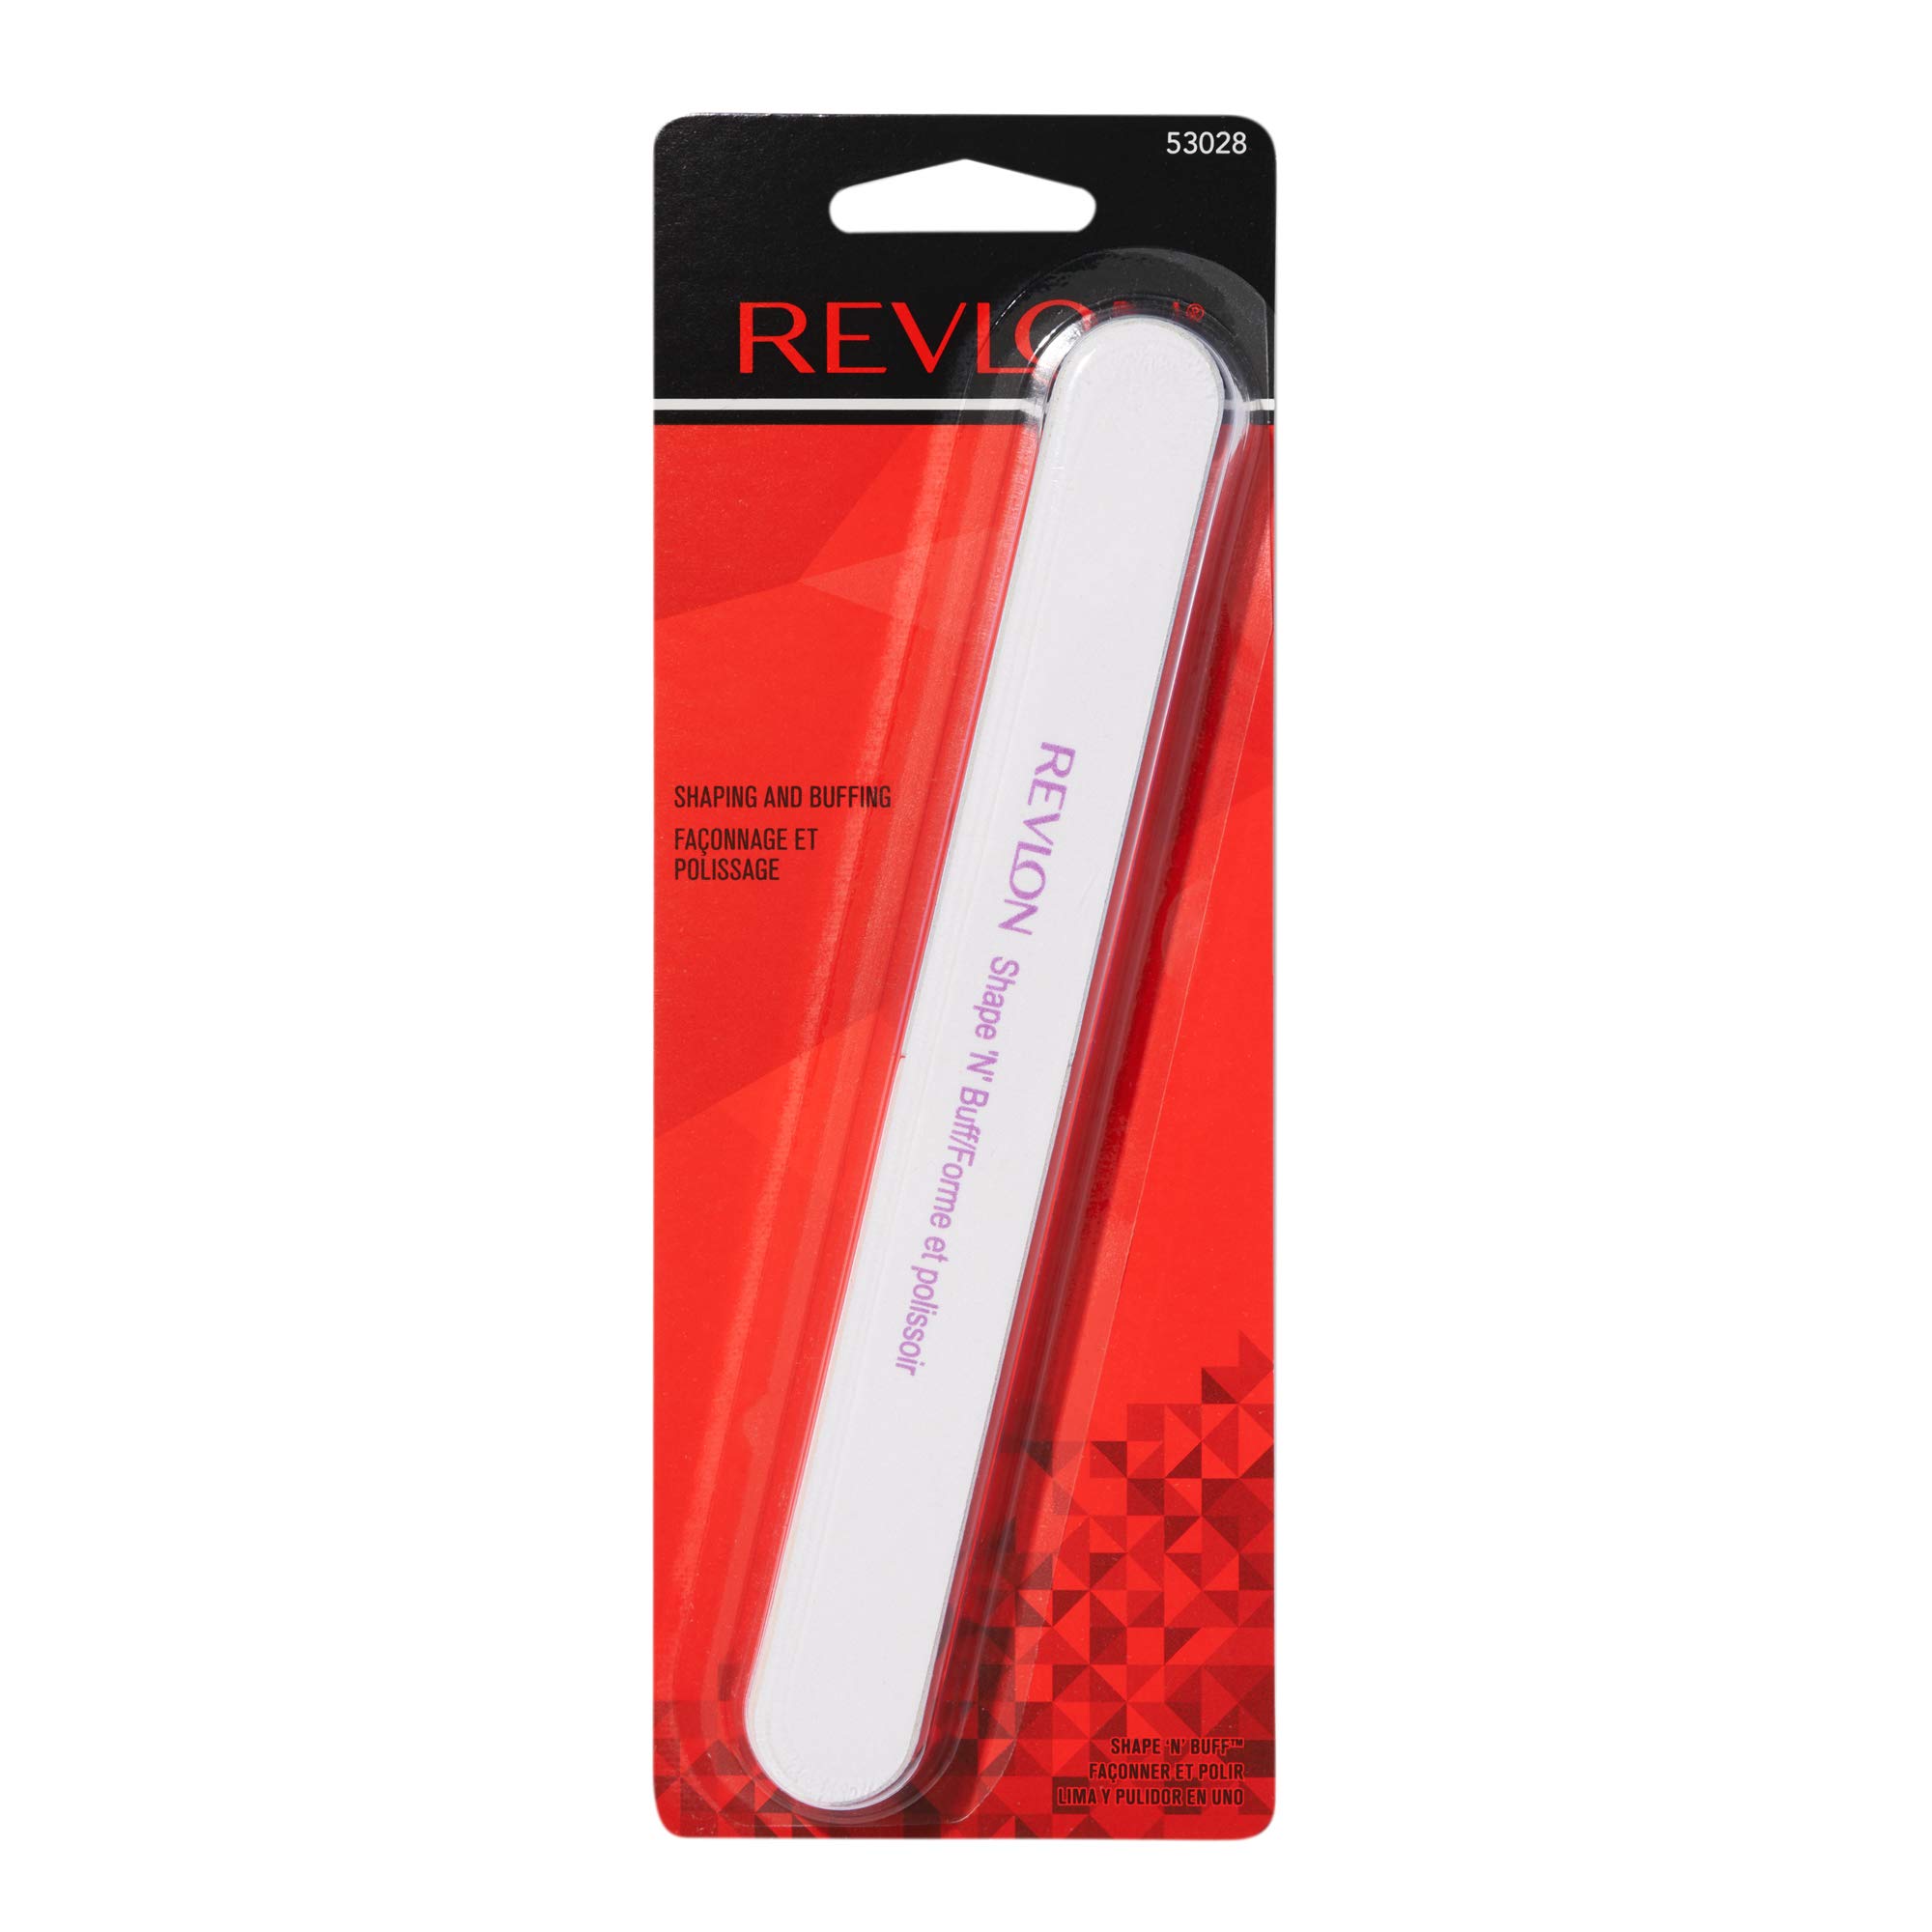 Revlon Nail Buffer, Shape 'N' Buff Nail File & Buffer, Nail Care Tool, All-in-One Shaping & Buffing, Easy to Use (Pack of 1)